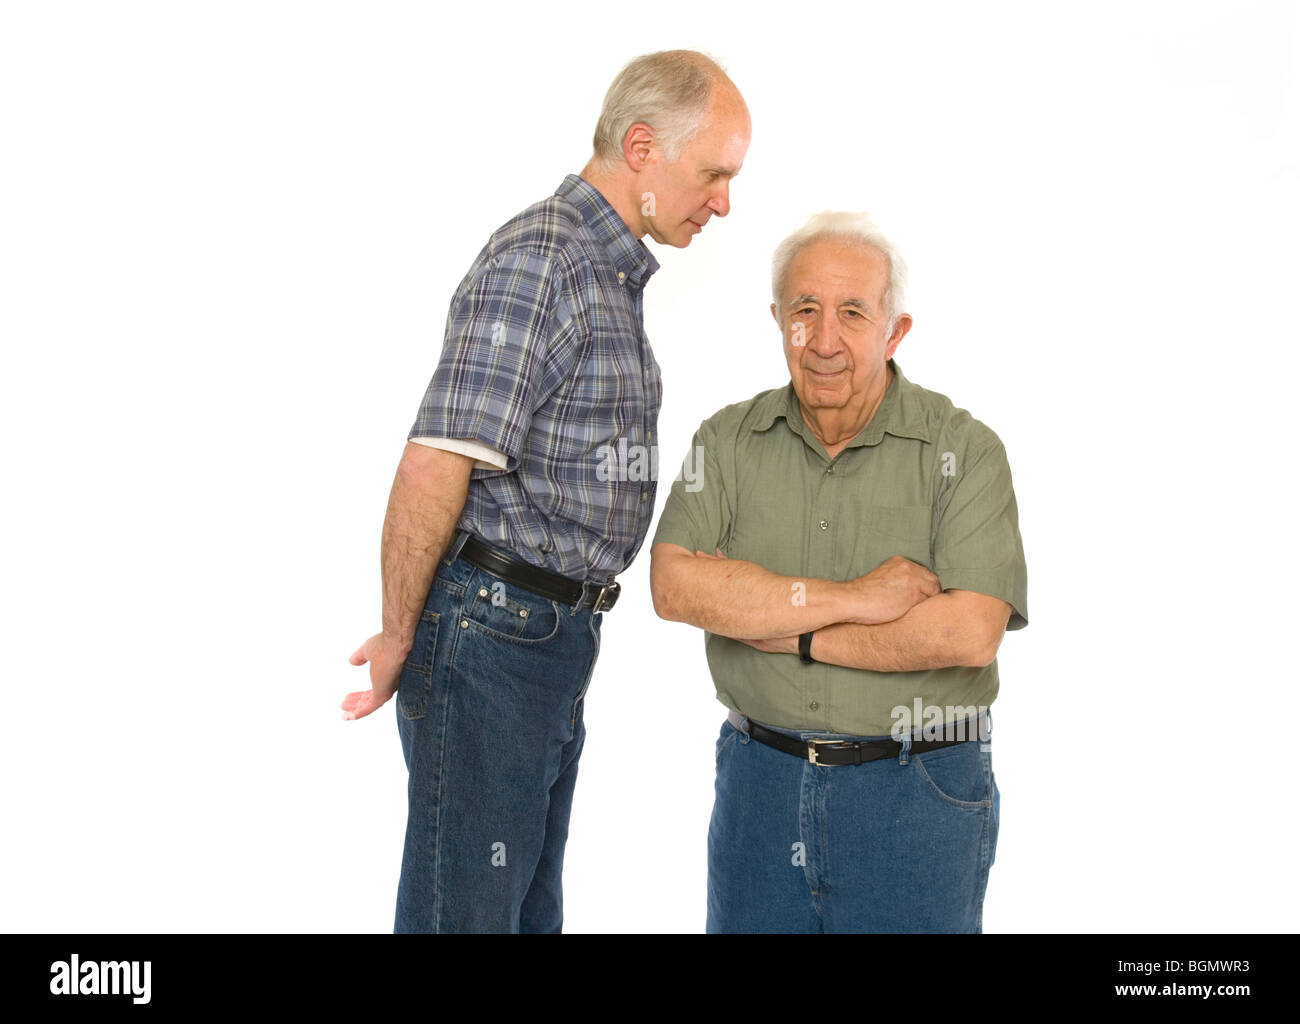 A senior retired elderly gentleman stands with a tall middle aged man. Stock Photo